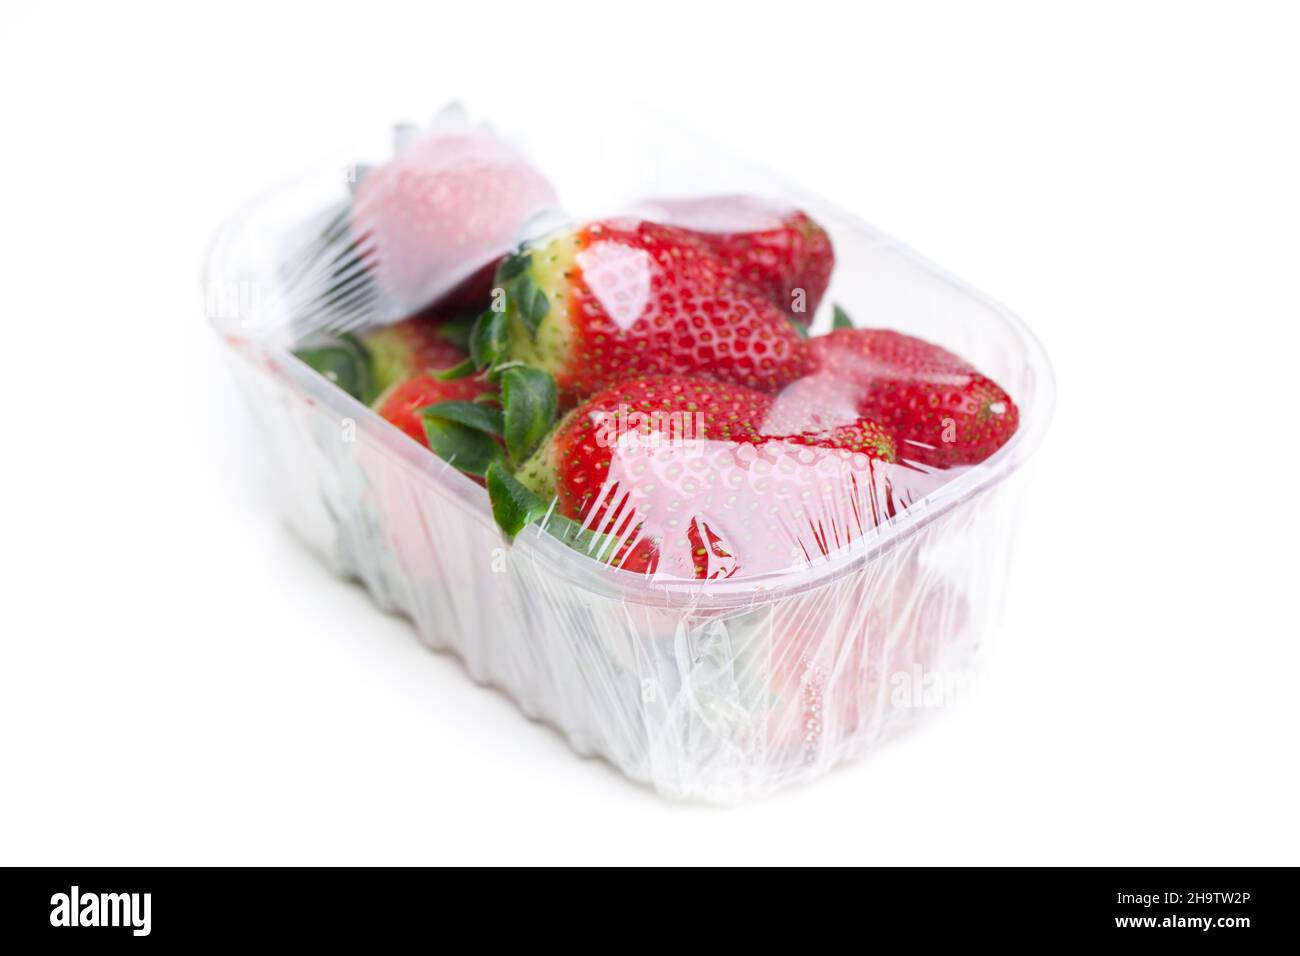 strawberries, foil, plastic, artificial, food, fruit, white, background, mass production, above, aerial view, packing, packed, perspective, strawberry Stock Photo